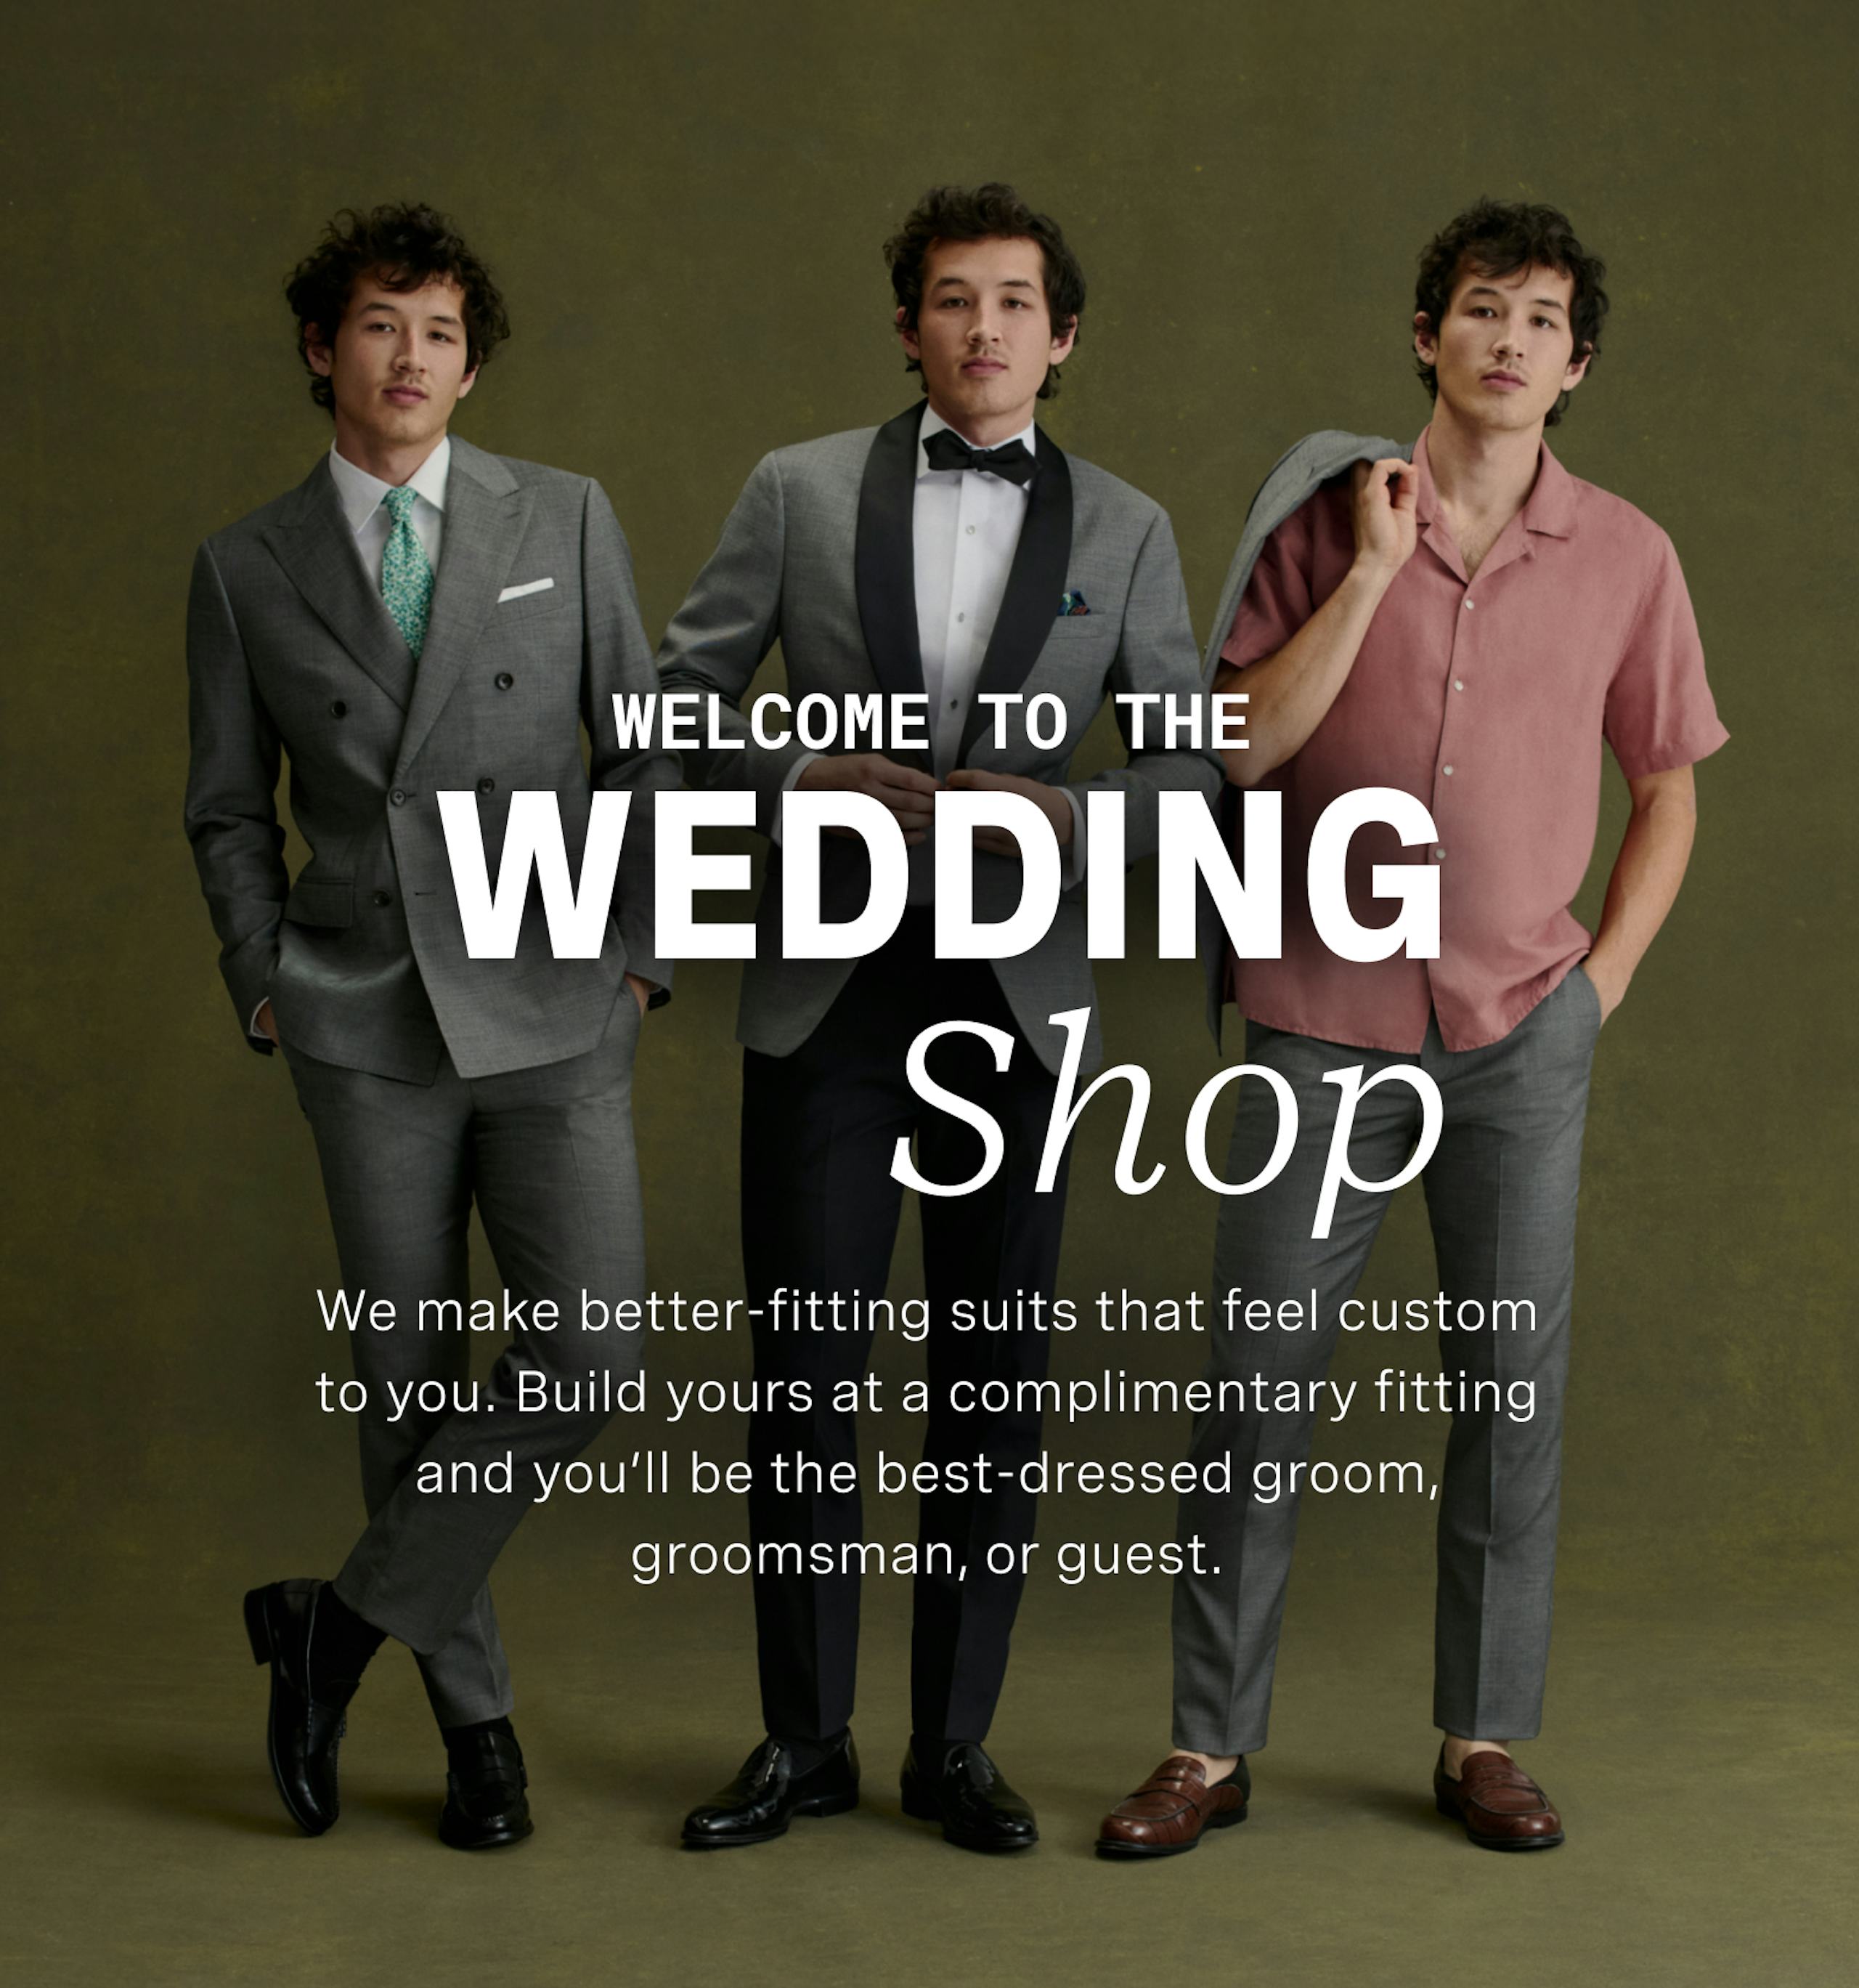 Men's Suit styled three different ways | Welcome to the Wedding Shop | Book a complimentary appointment and prepare to be the best-dressed groom, groomsman, or guest at the wedding.